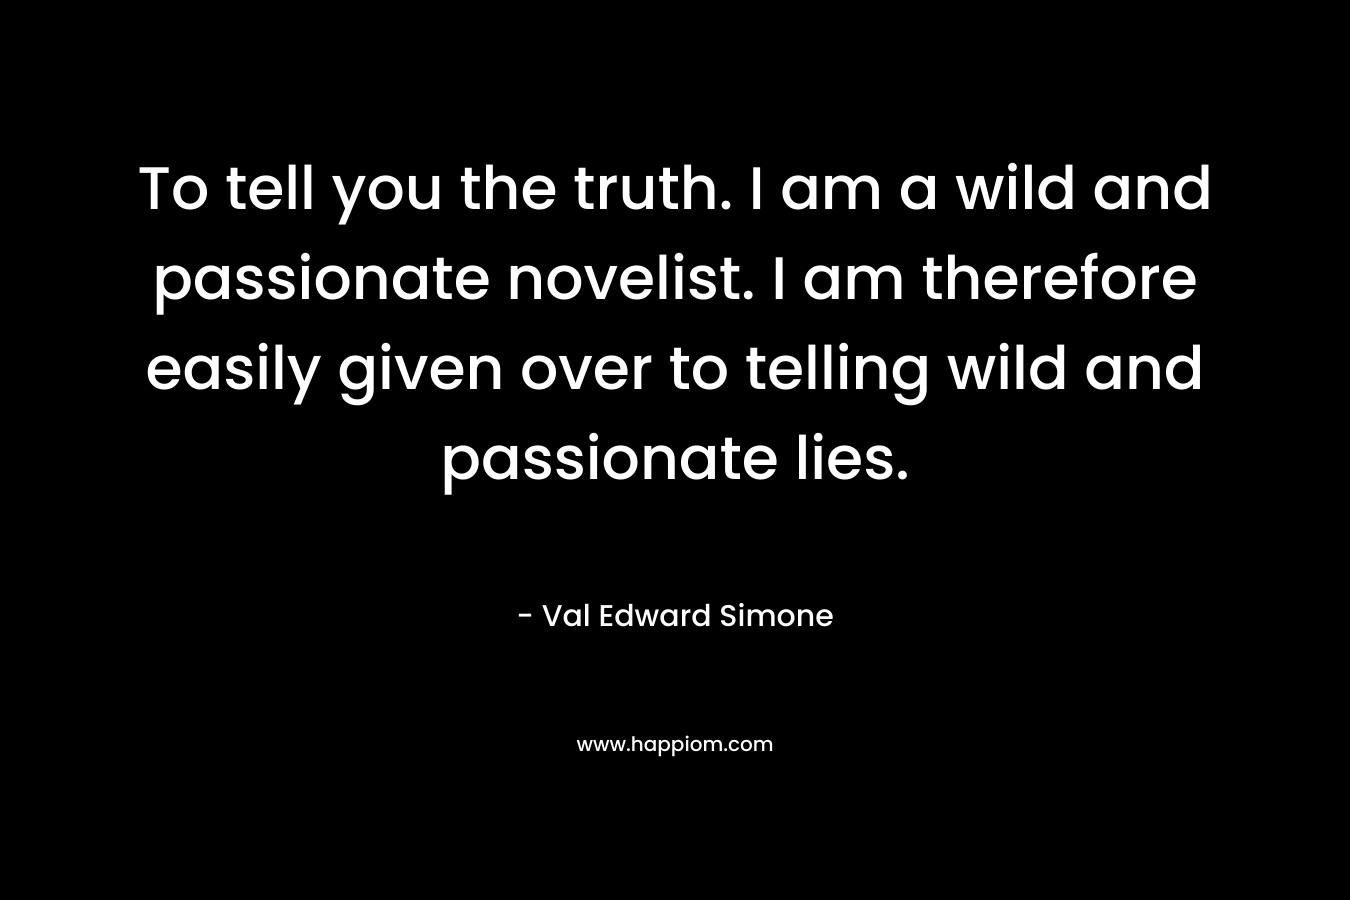 To tell you the truth. I am a wild and passionate novelist. I am therefore easily given over to telling wild and passionate lies. – Val Edward Simone